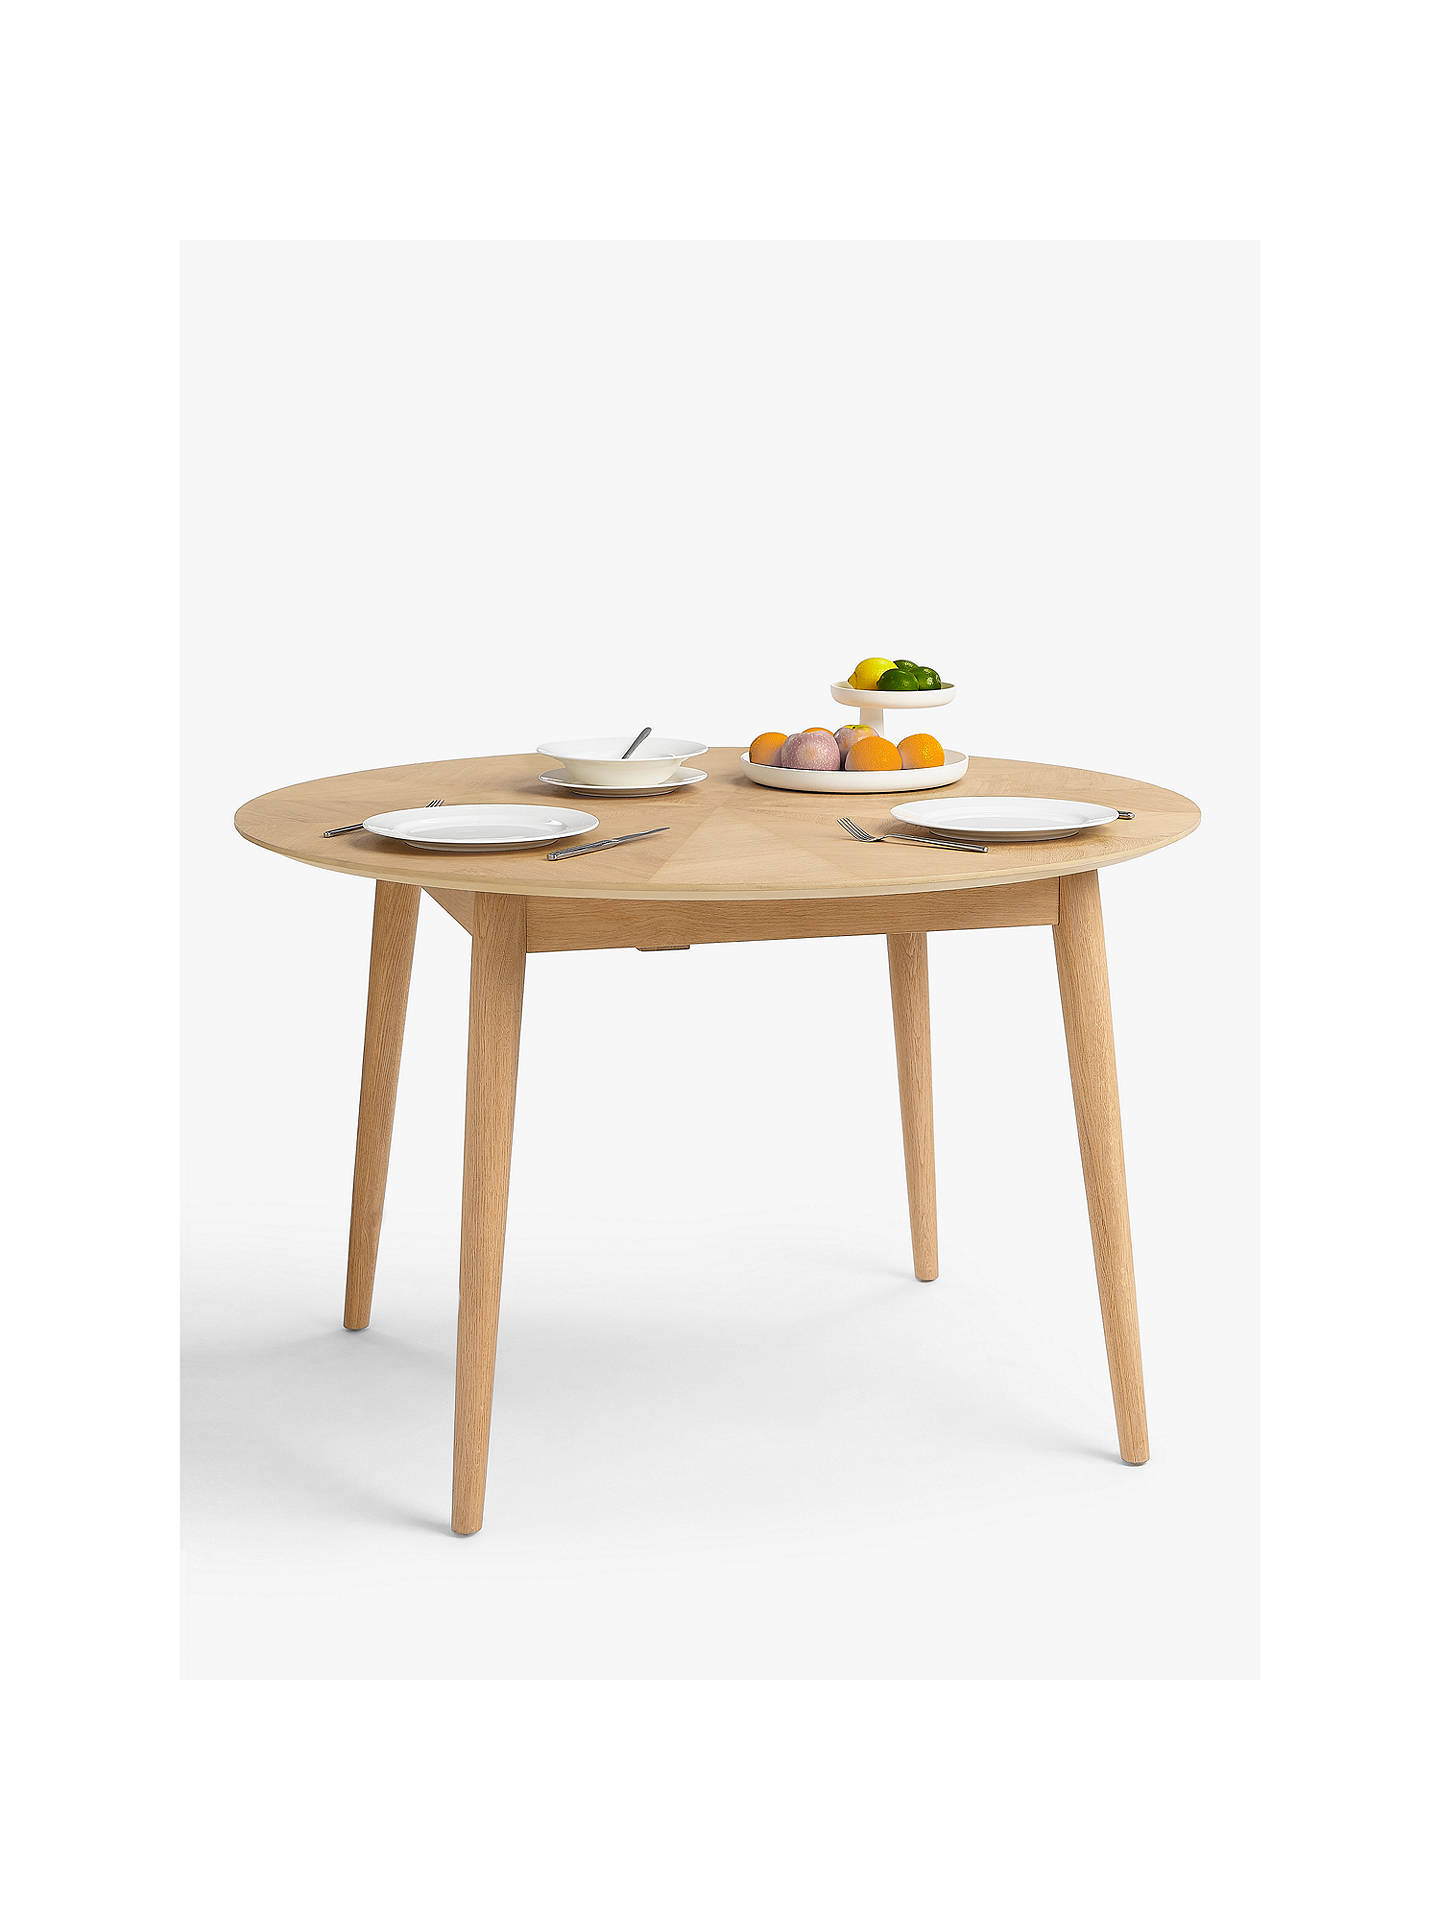 Croft Collection Iona 4 6 Seater Extending Round Dining Table At John Lewis Partners